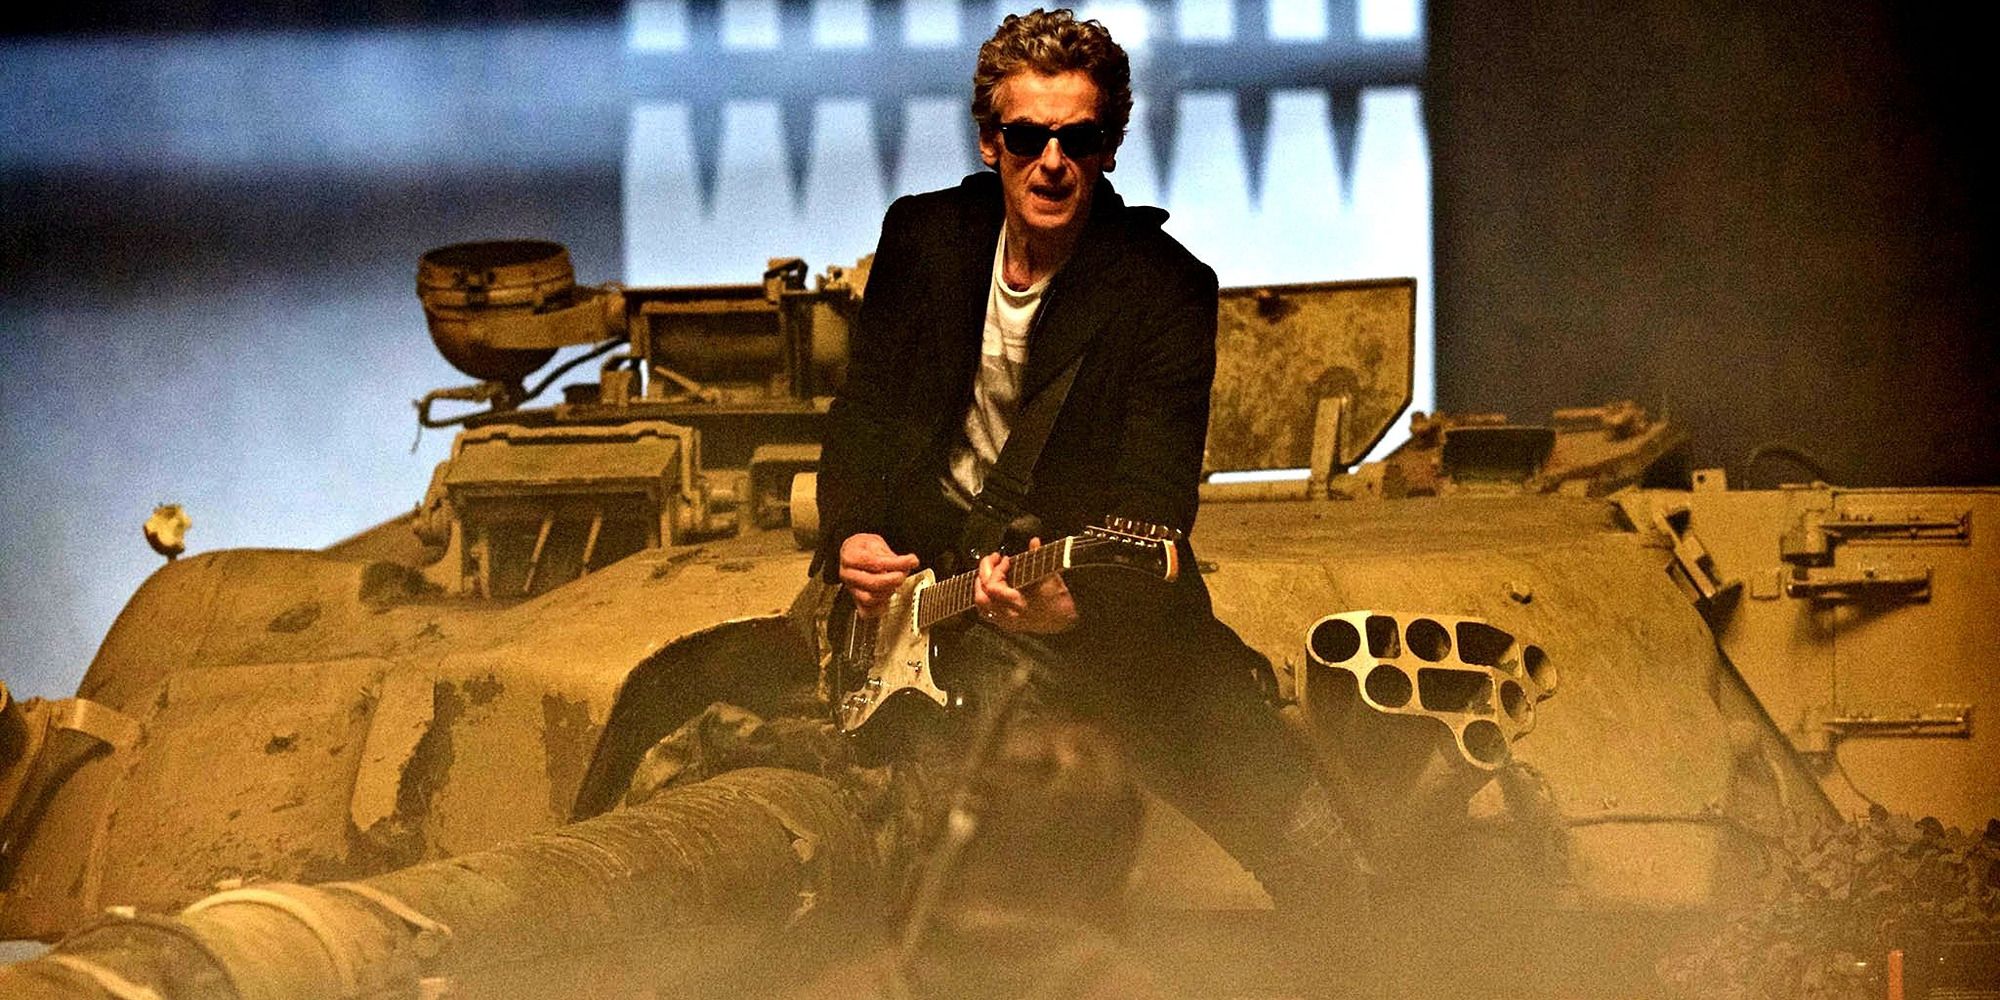 the Twelfth Doctor playing the guitar with sunglasses on, on top of a tank